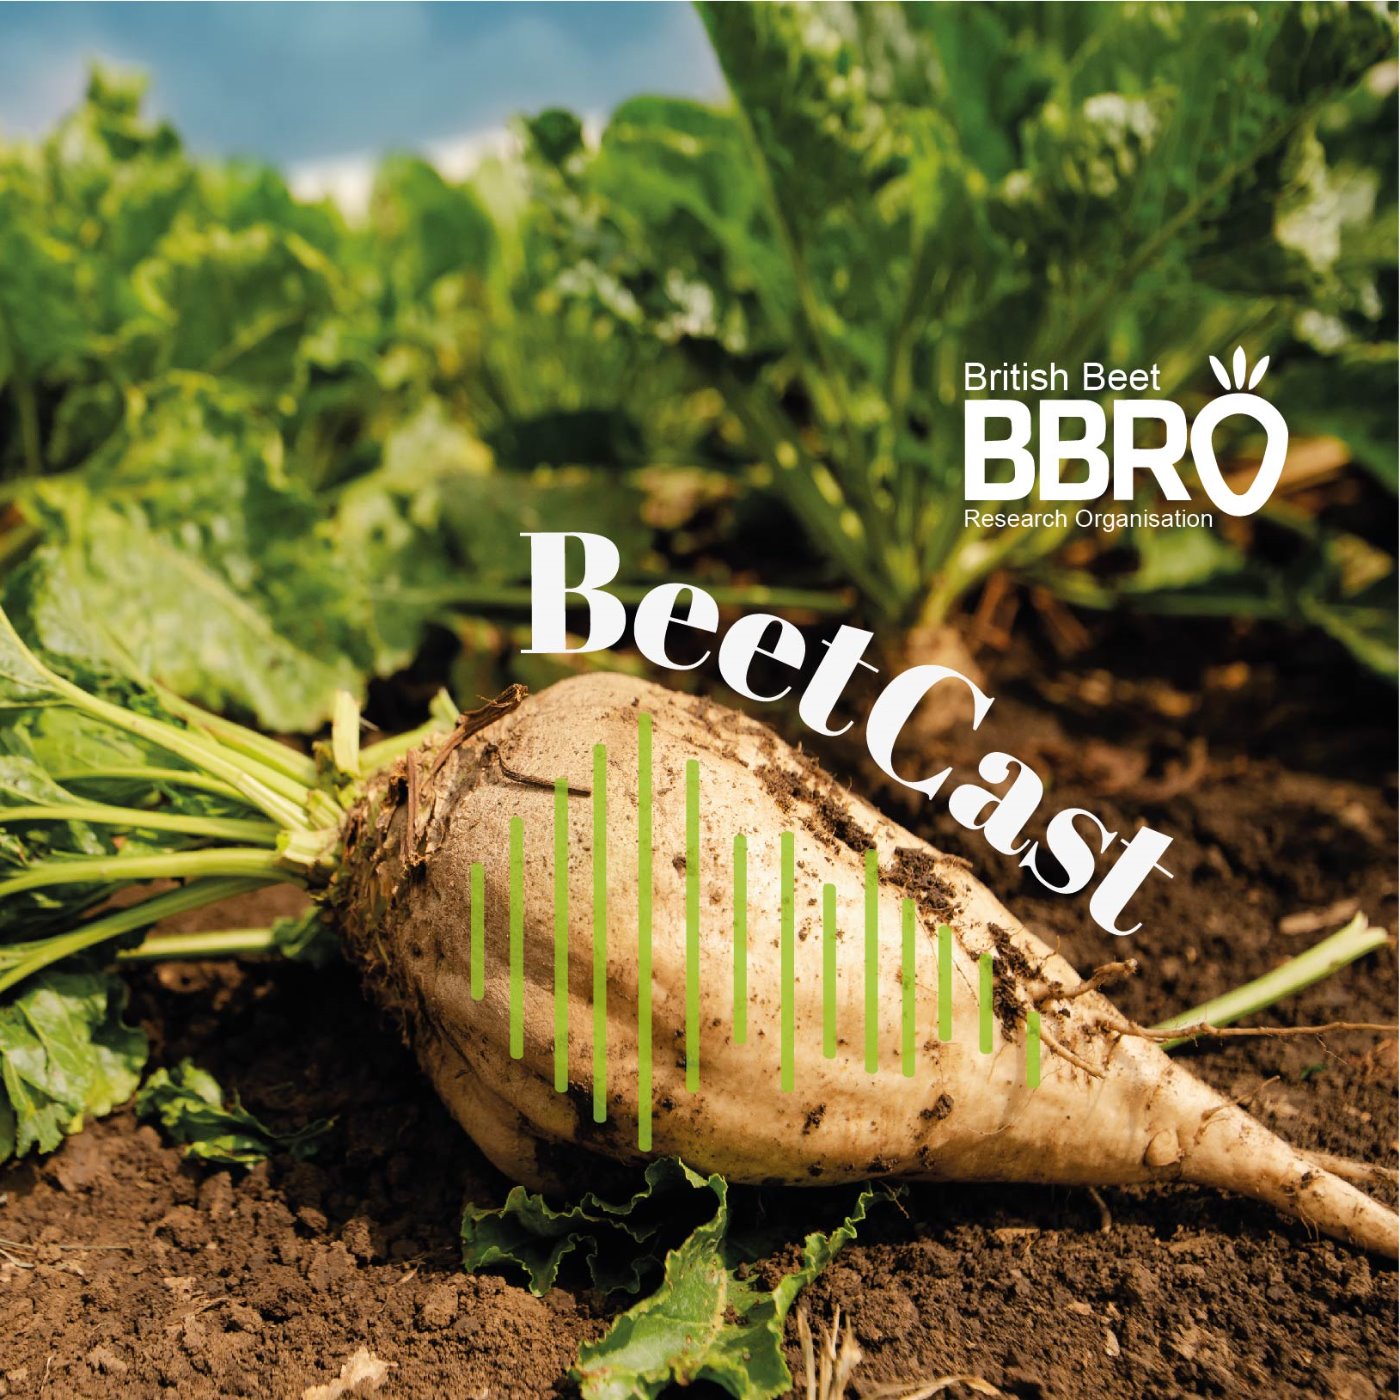 BeetCast (July): Insight into BeetField21 discussions